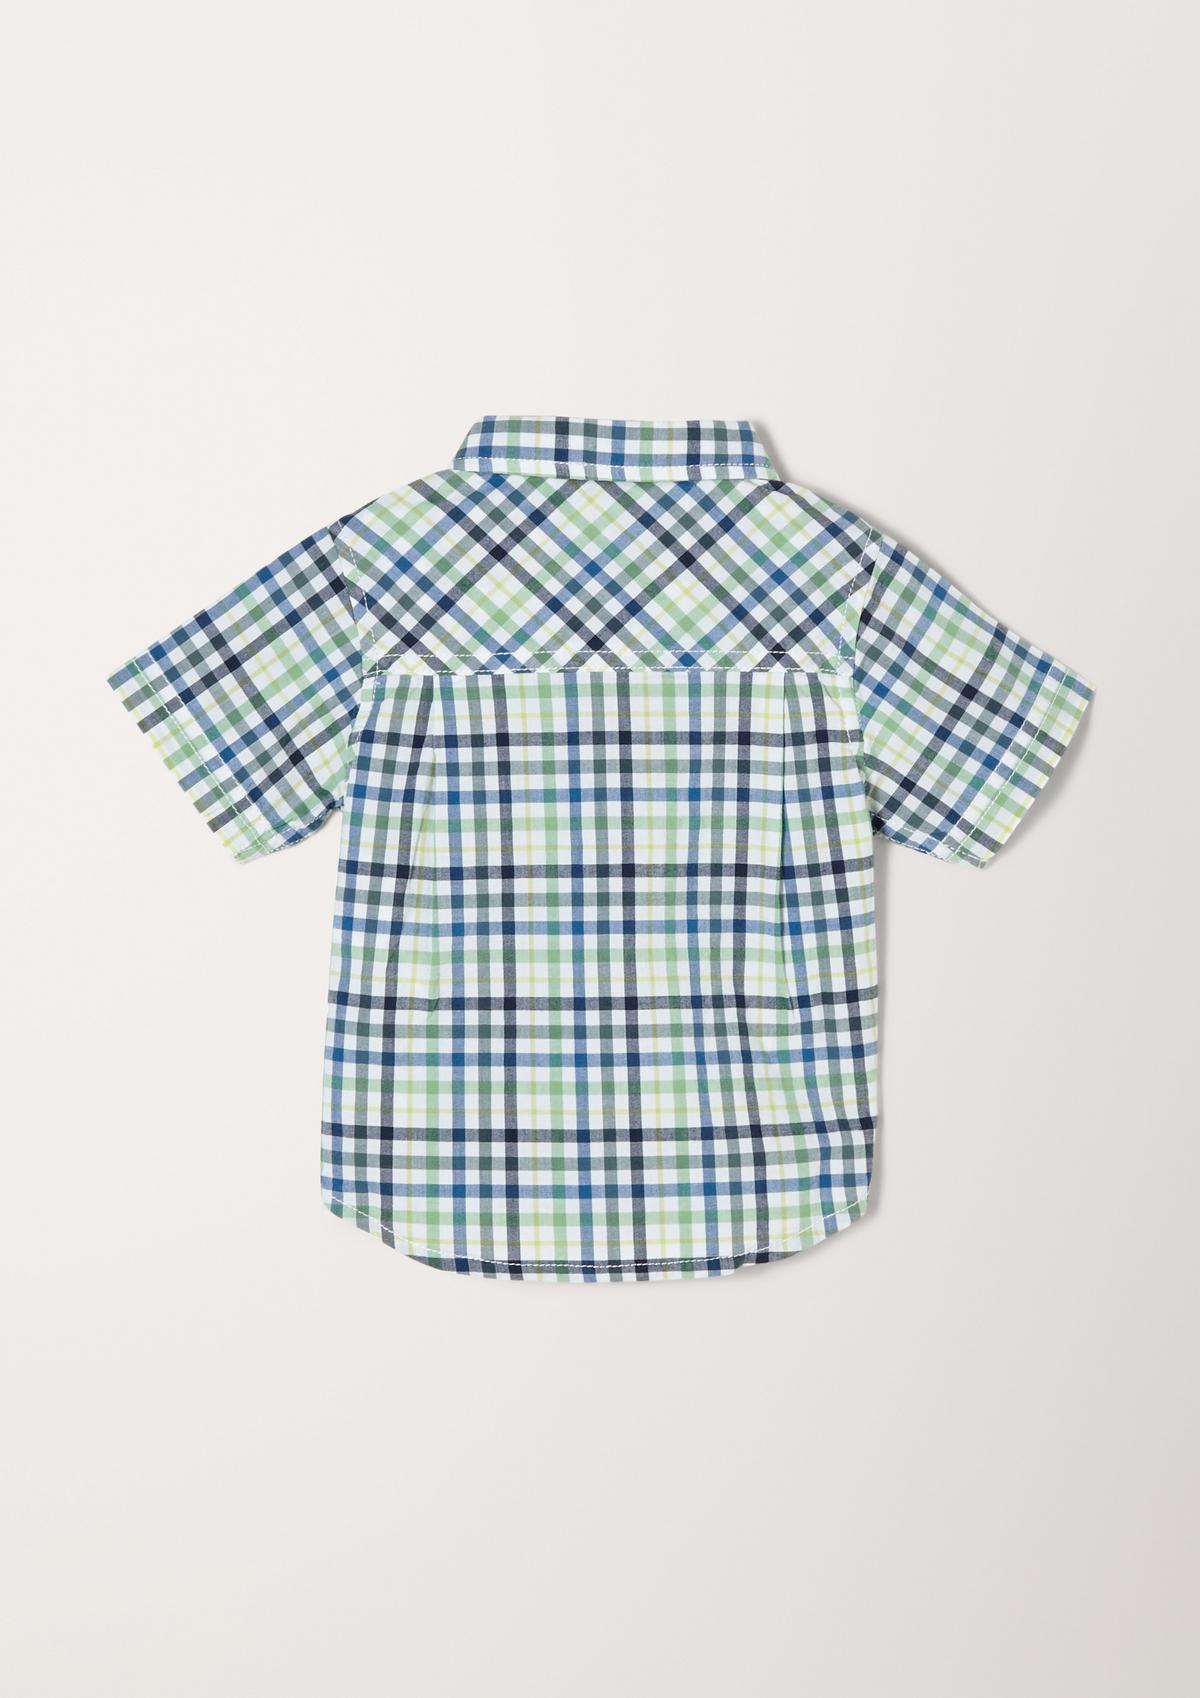 s.Oliver shirt with a check pattern